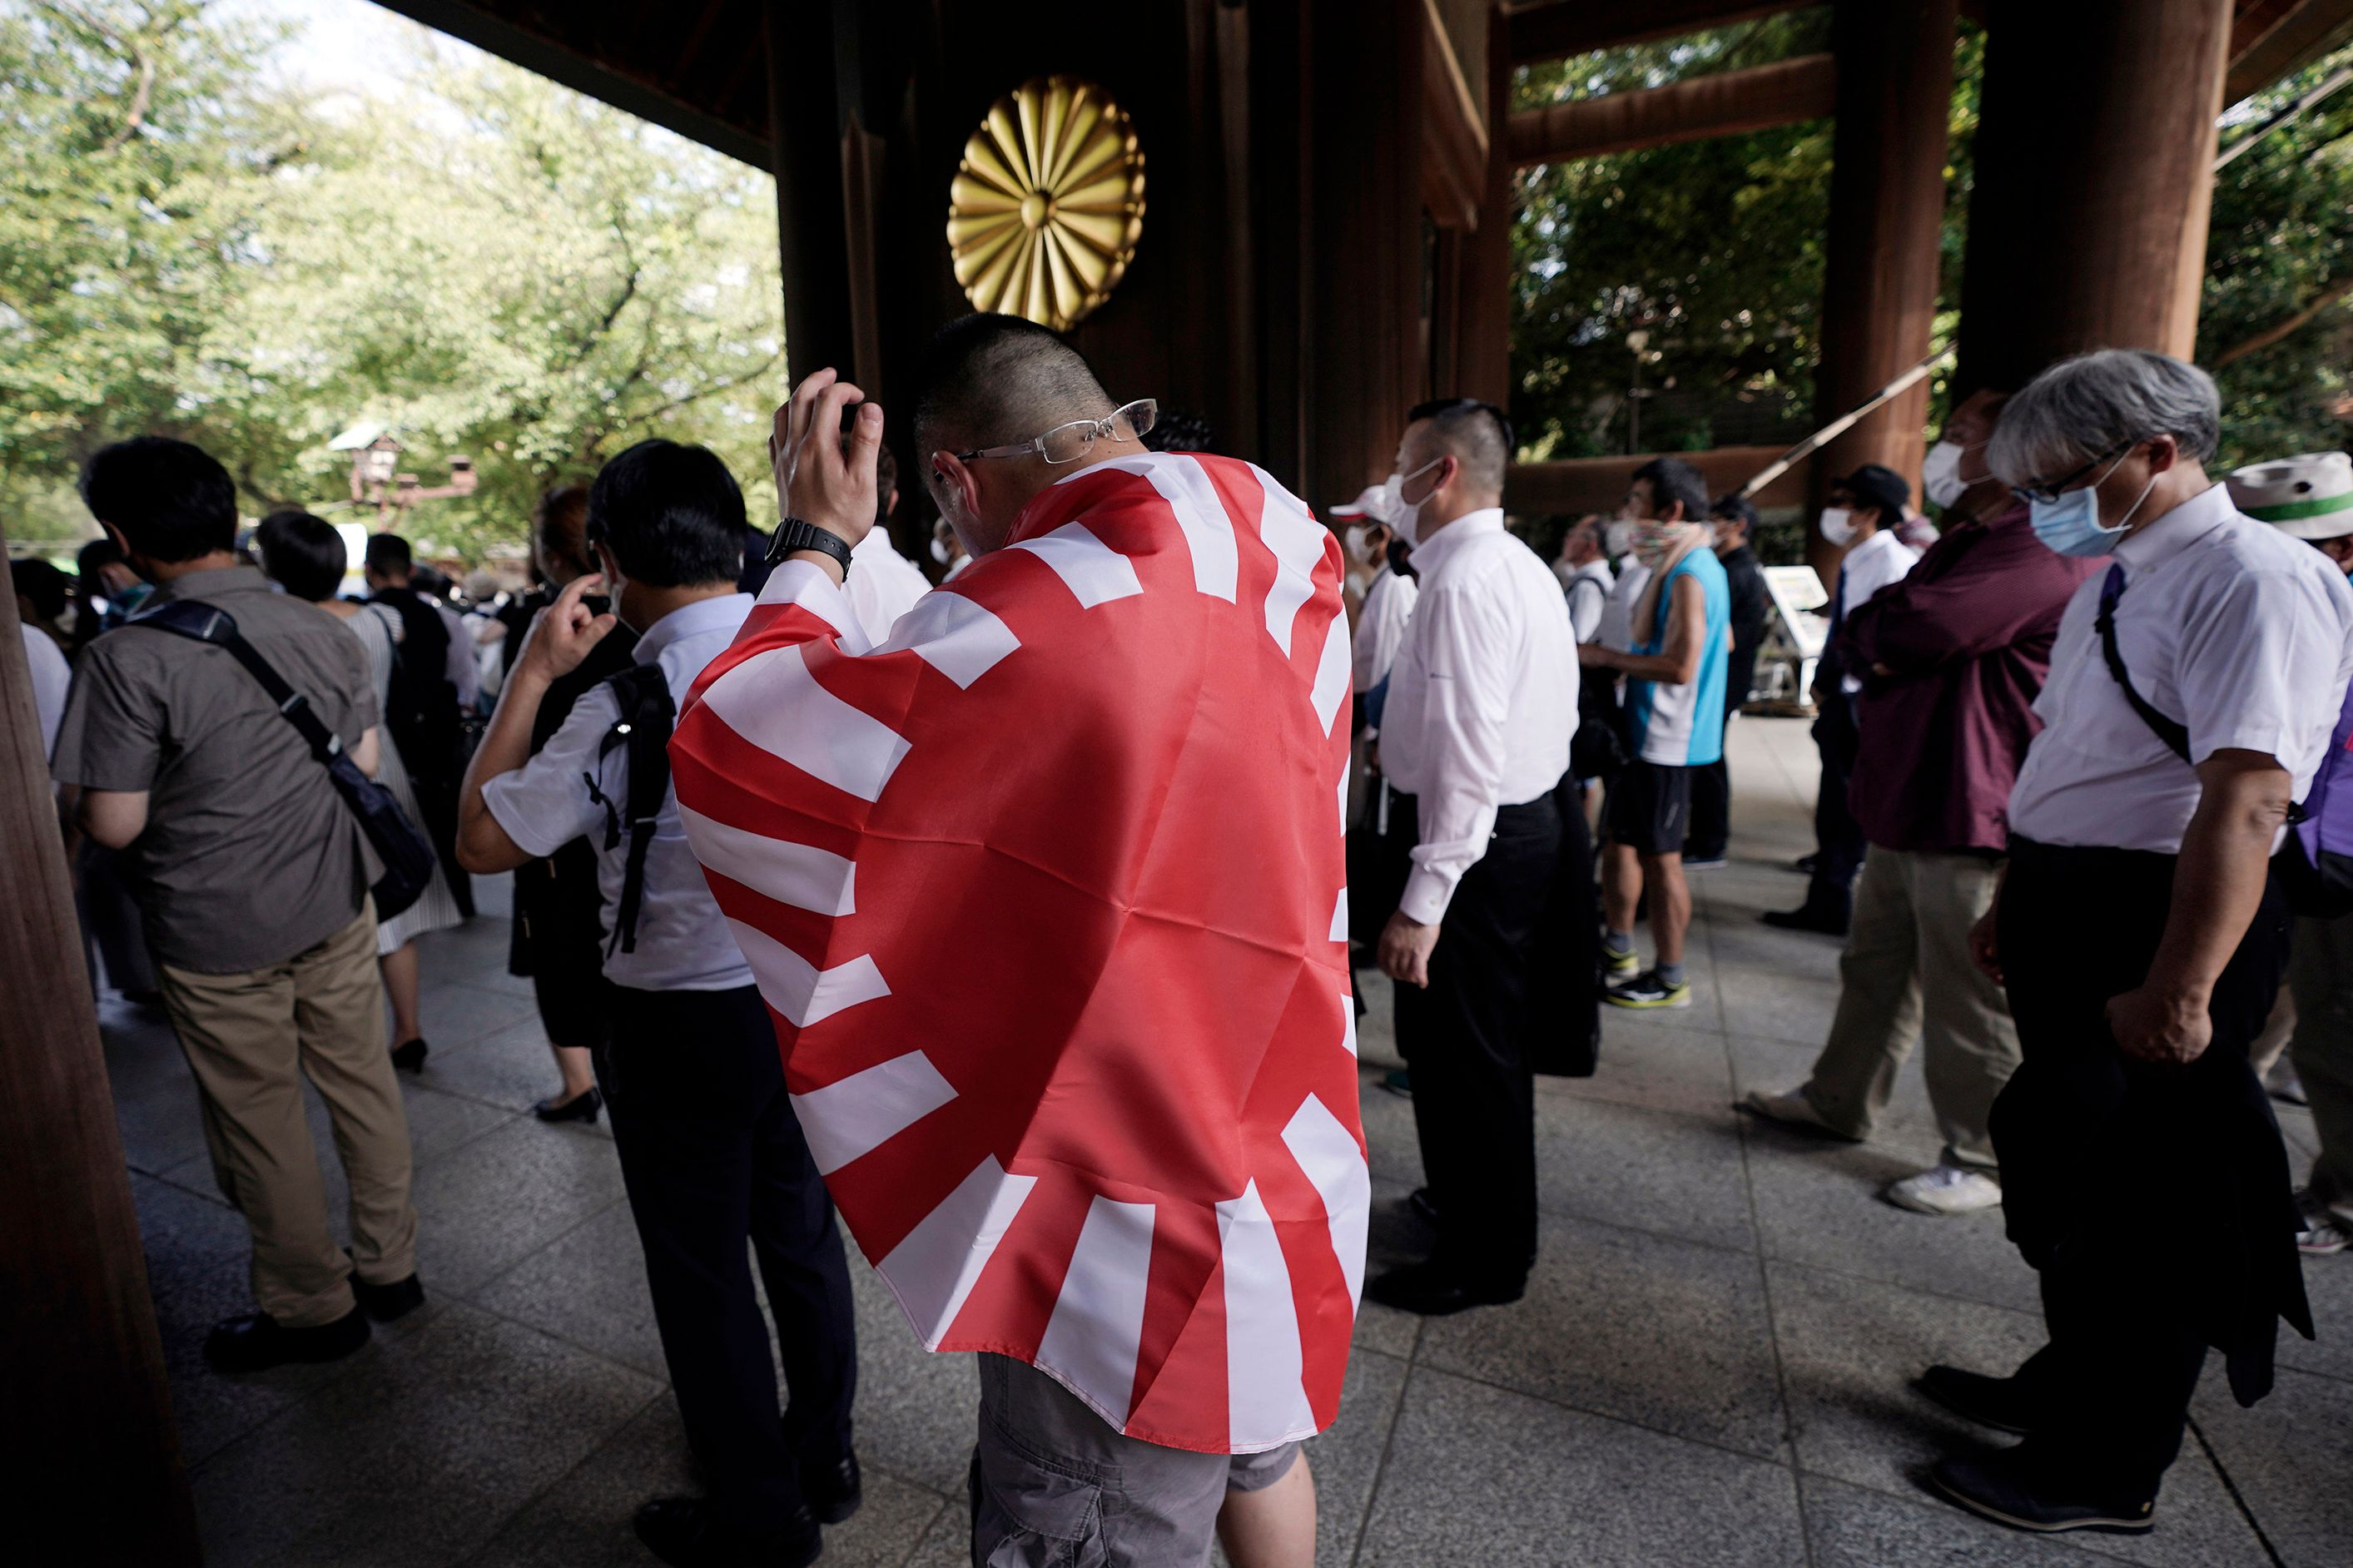 EXPLAINER: Why Japan 'rising sun' flag provokes Olympic ire | The